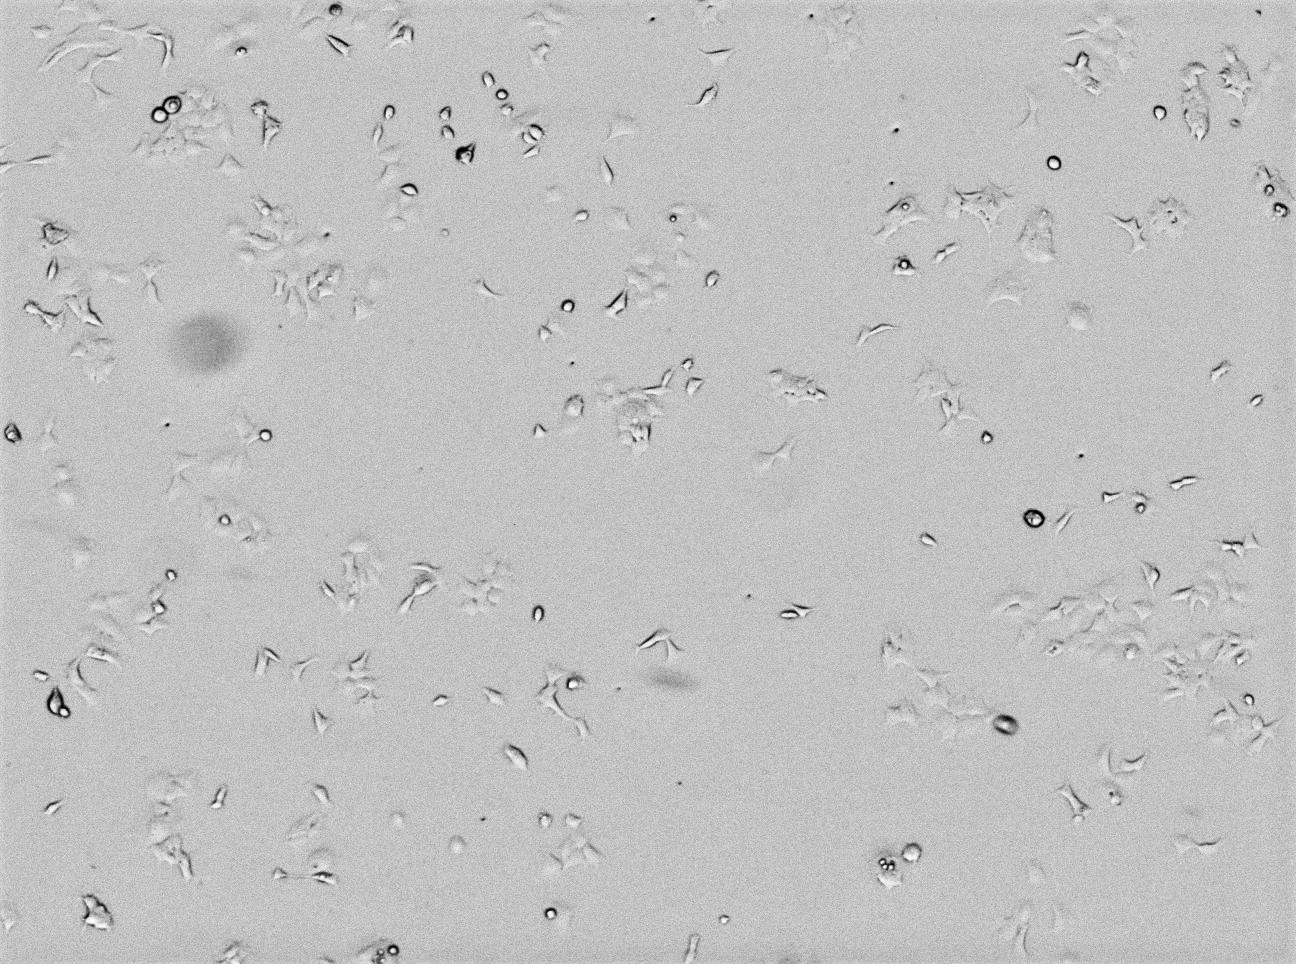 Confluence and morphology of MRC-5, VERO, and HEK-293 adherent cells grown in HyClone™ Characterized FBS serum treated at either  20°C or 40°C.